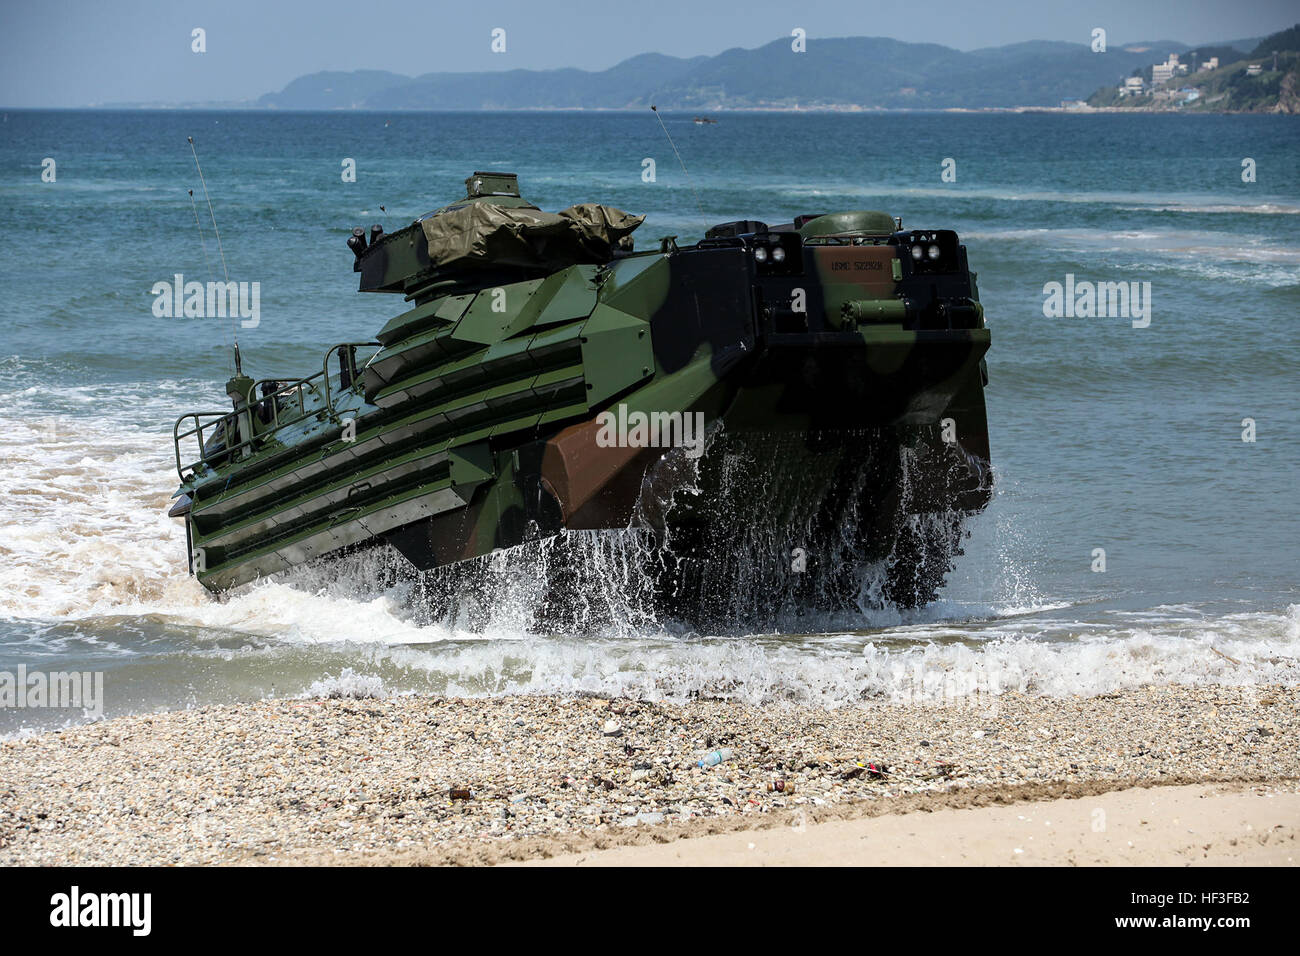 A U.S. Marine Corps Amphibious Assualt Vehicle (AAV) with Alpha Company, 4th Assault Amphibian Battalion, 4th Marine Division, Marine Forces Reserve hits the surf during the amphibious operations portion of Korean Marine Exchange Program 15-8 at Deagu Beach in Pohang, South Korea as a part of Peninsula Express 15, July 1, 2015. Peninsula Express is one in a series of regularly-scheduled combined, small-unit, tactical training exercises that demonstrates continued dedication to the ROK-U.S. relationship, contributing to the security and stability of the Korean Peninsula and Asia-Pacific region. Stock Photo